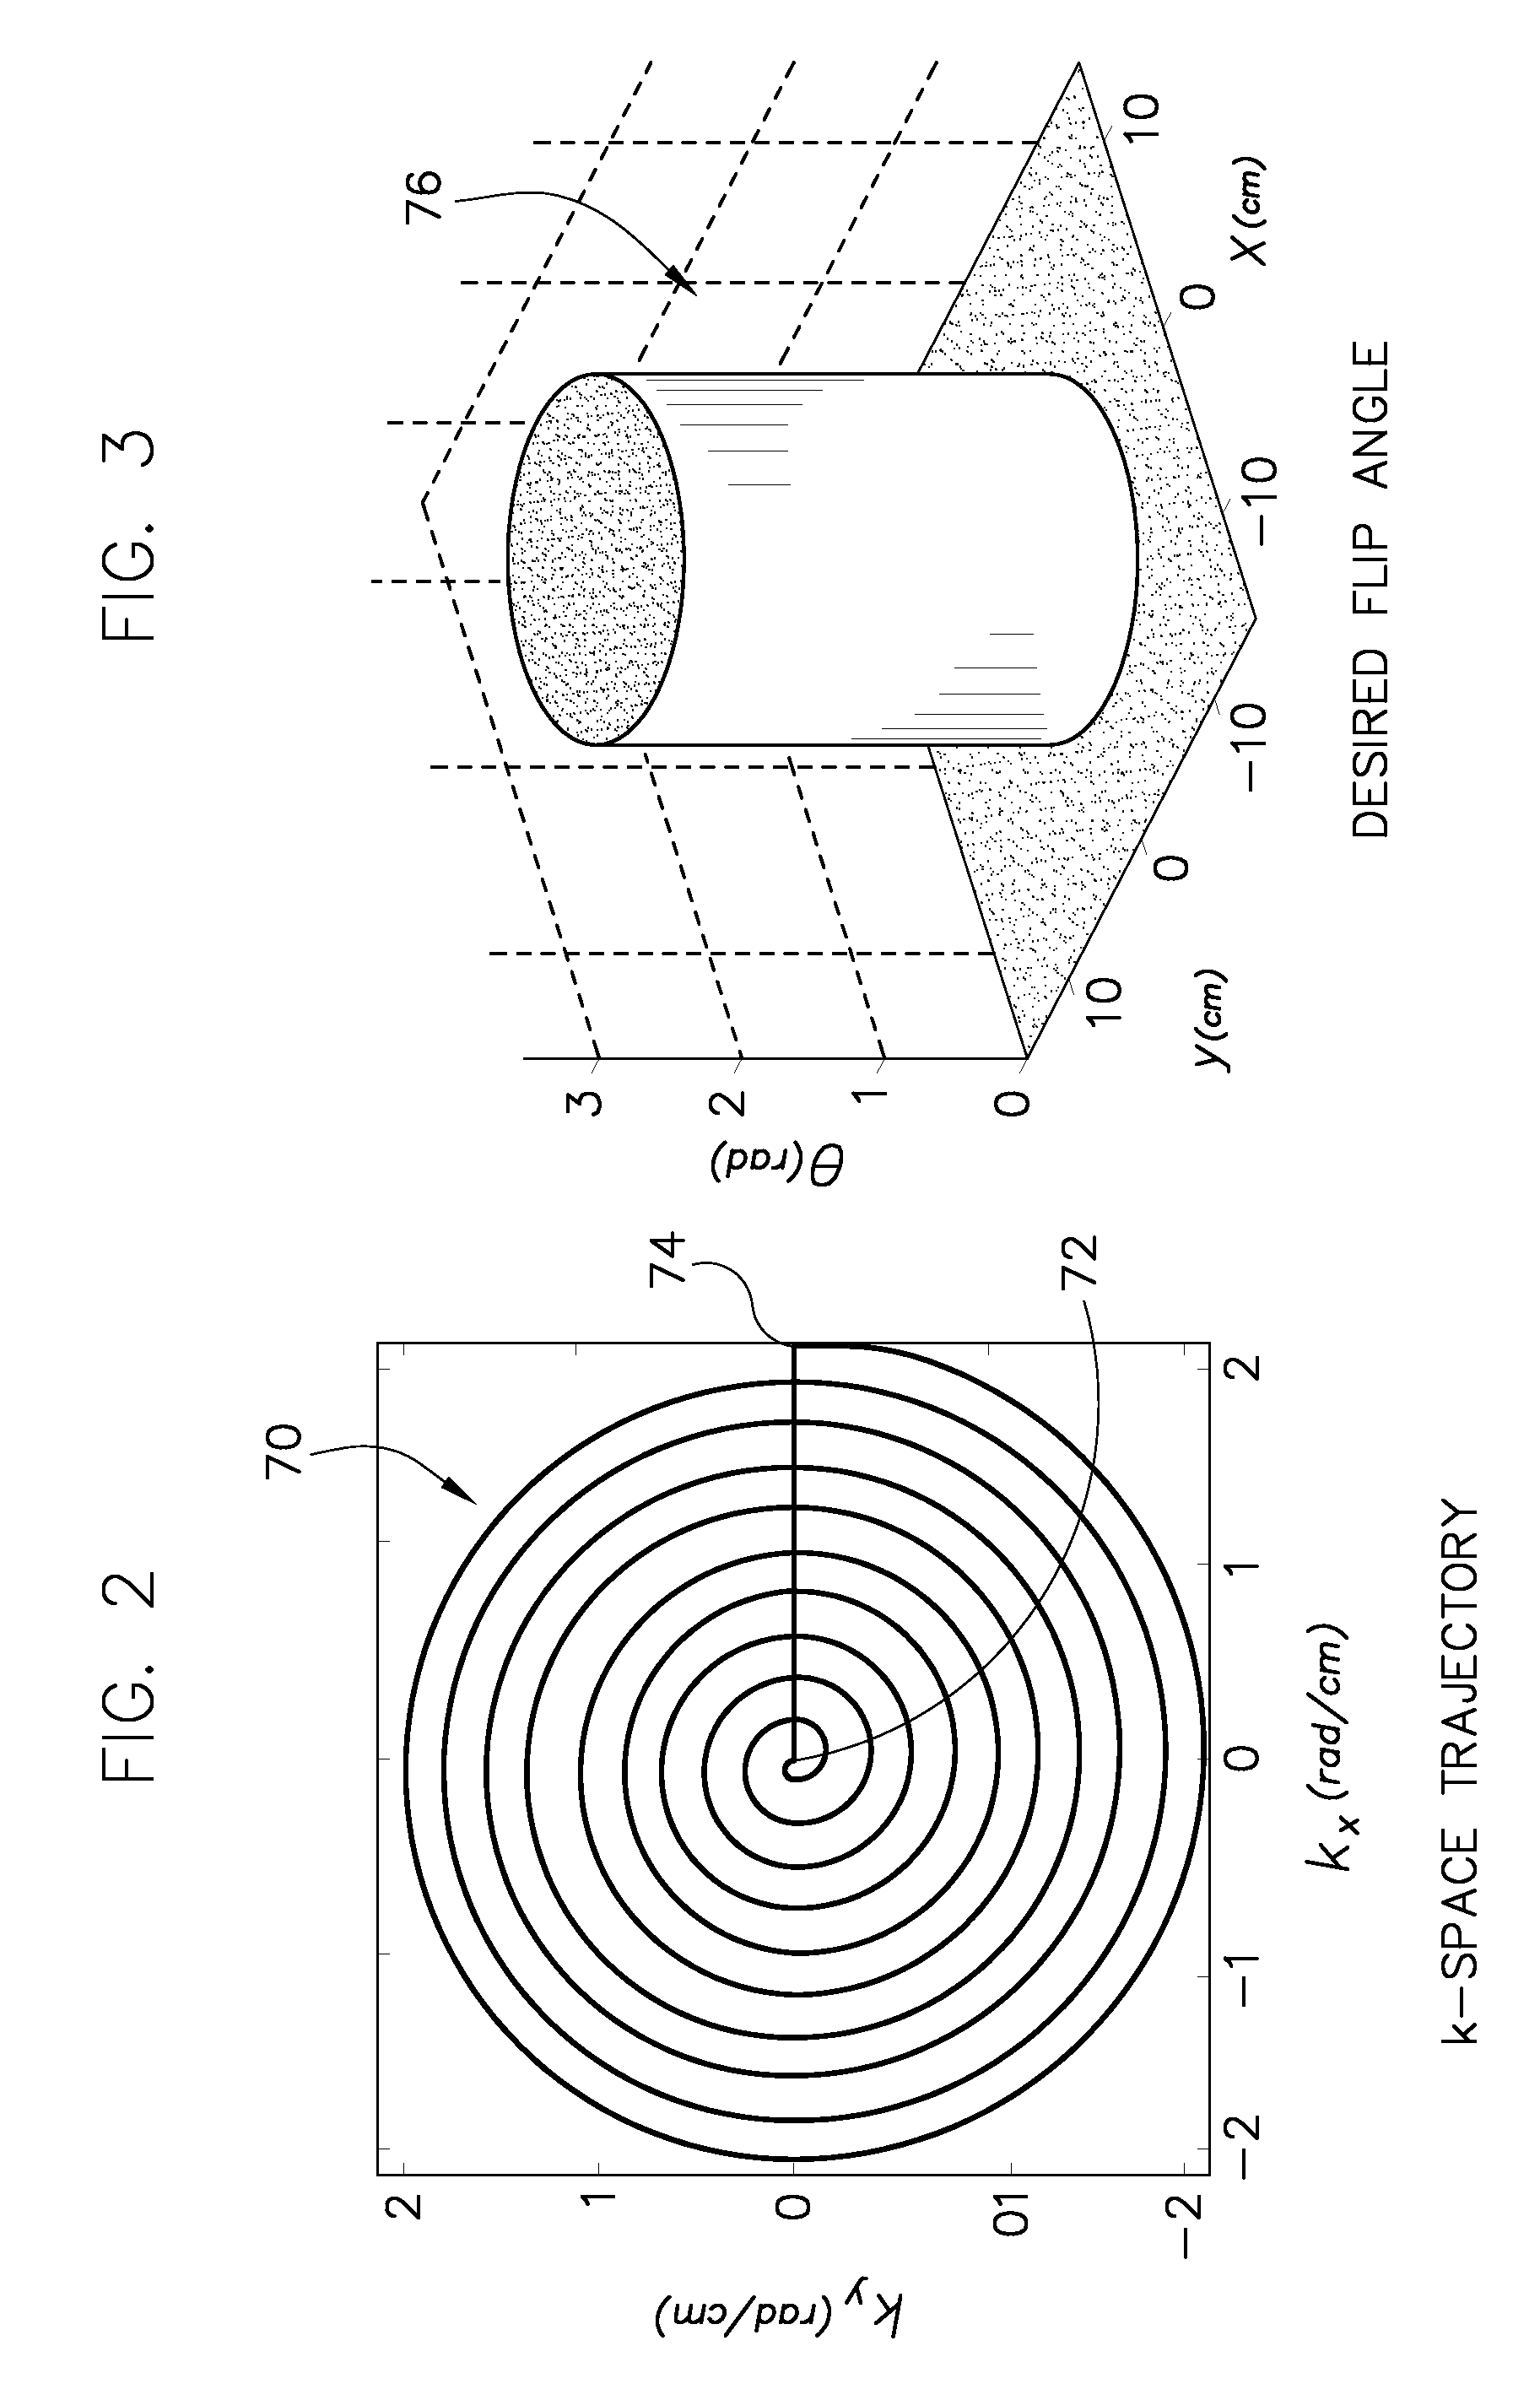 System and method for designing multi-channel RF pulses for MR imaging